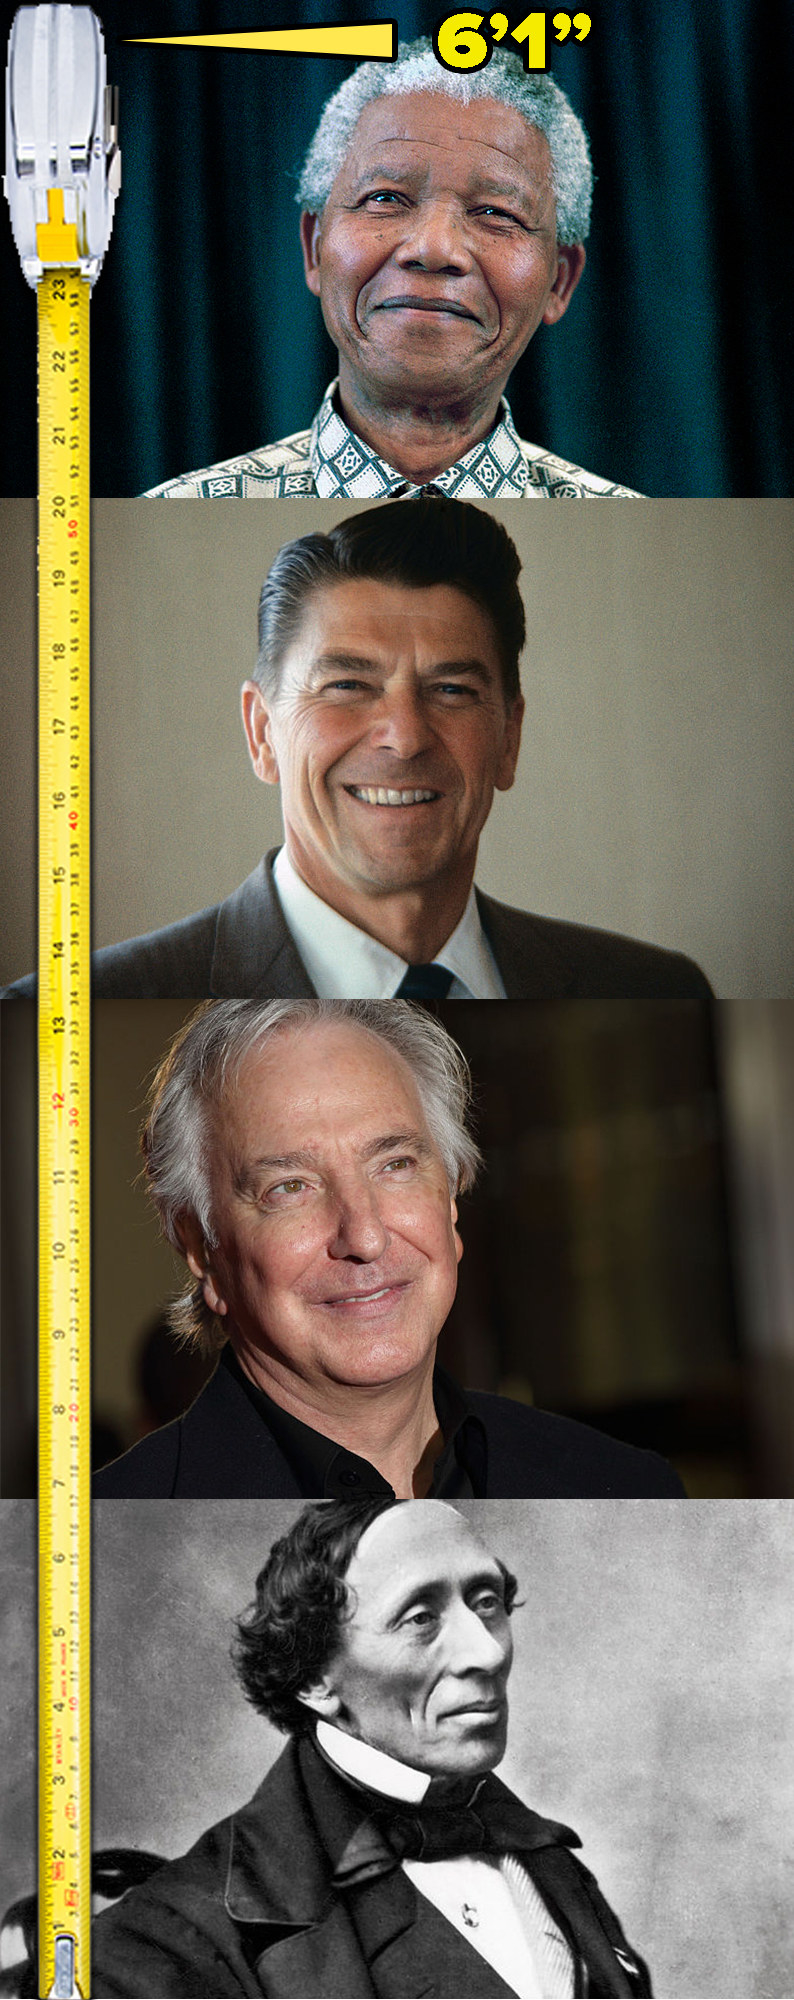 Stacked images of Nelson Mandela, Ronald Reagan, Alan Rickman, and Hans Christian Andersen next to a measuring tape